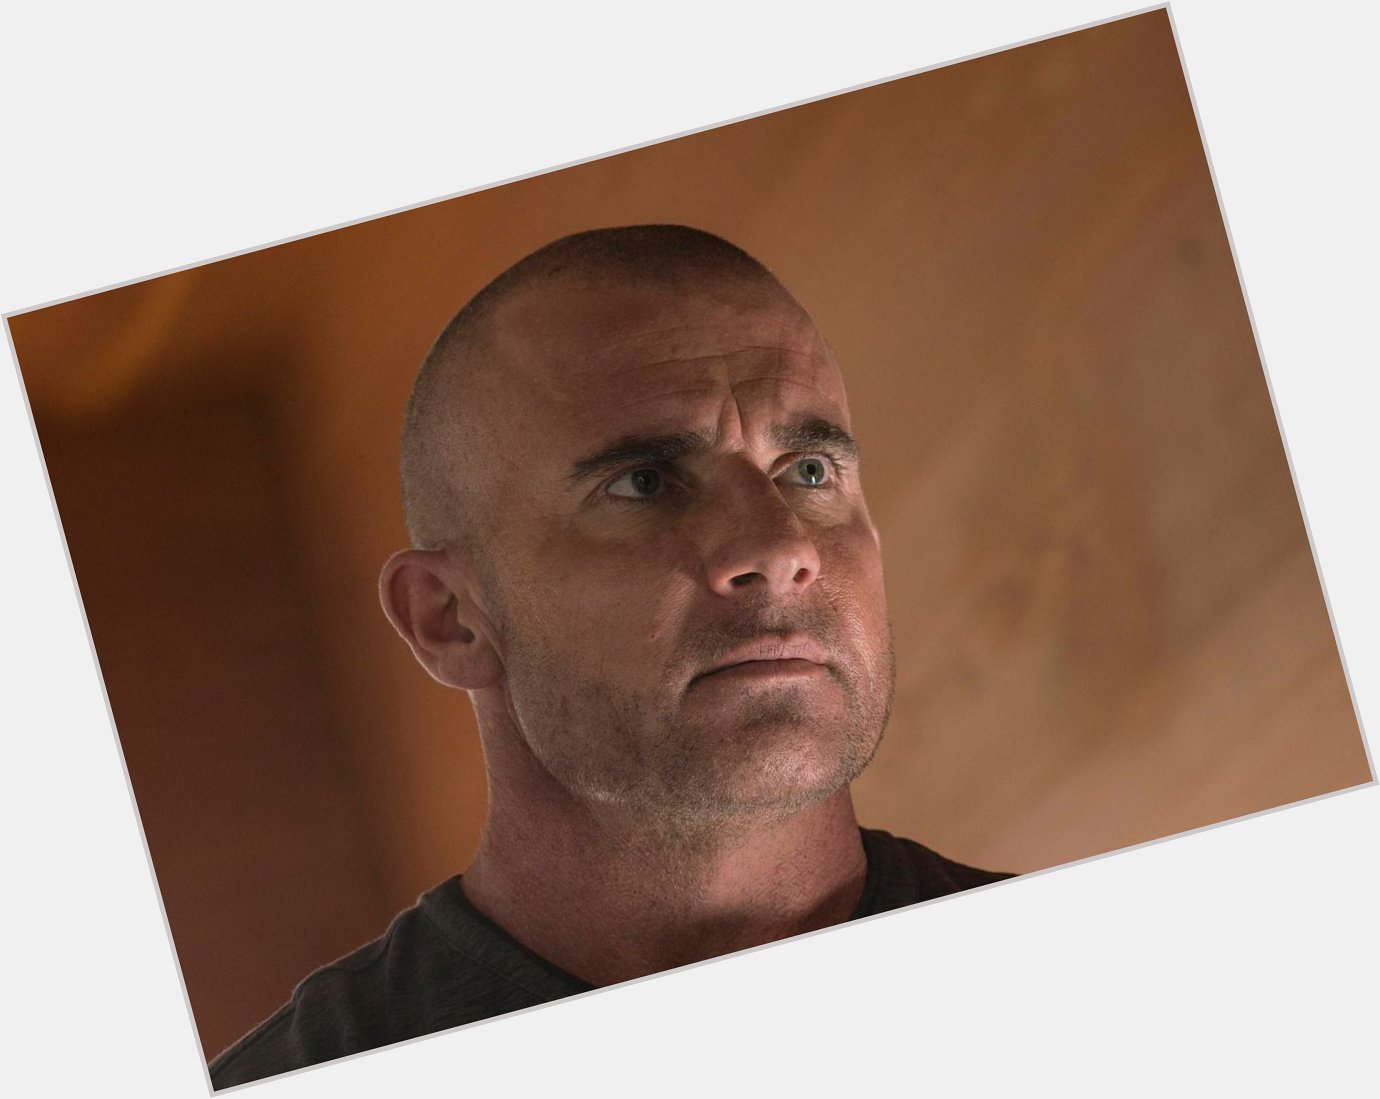 Remessage to wish the talented Dominic Purcell a very happy birthday.  